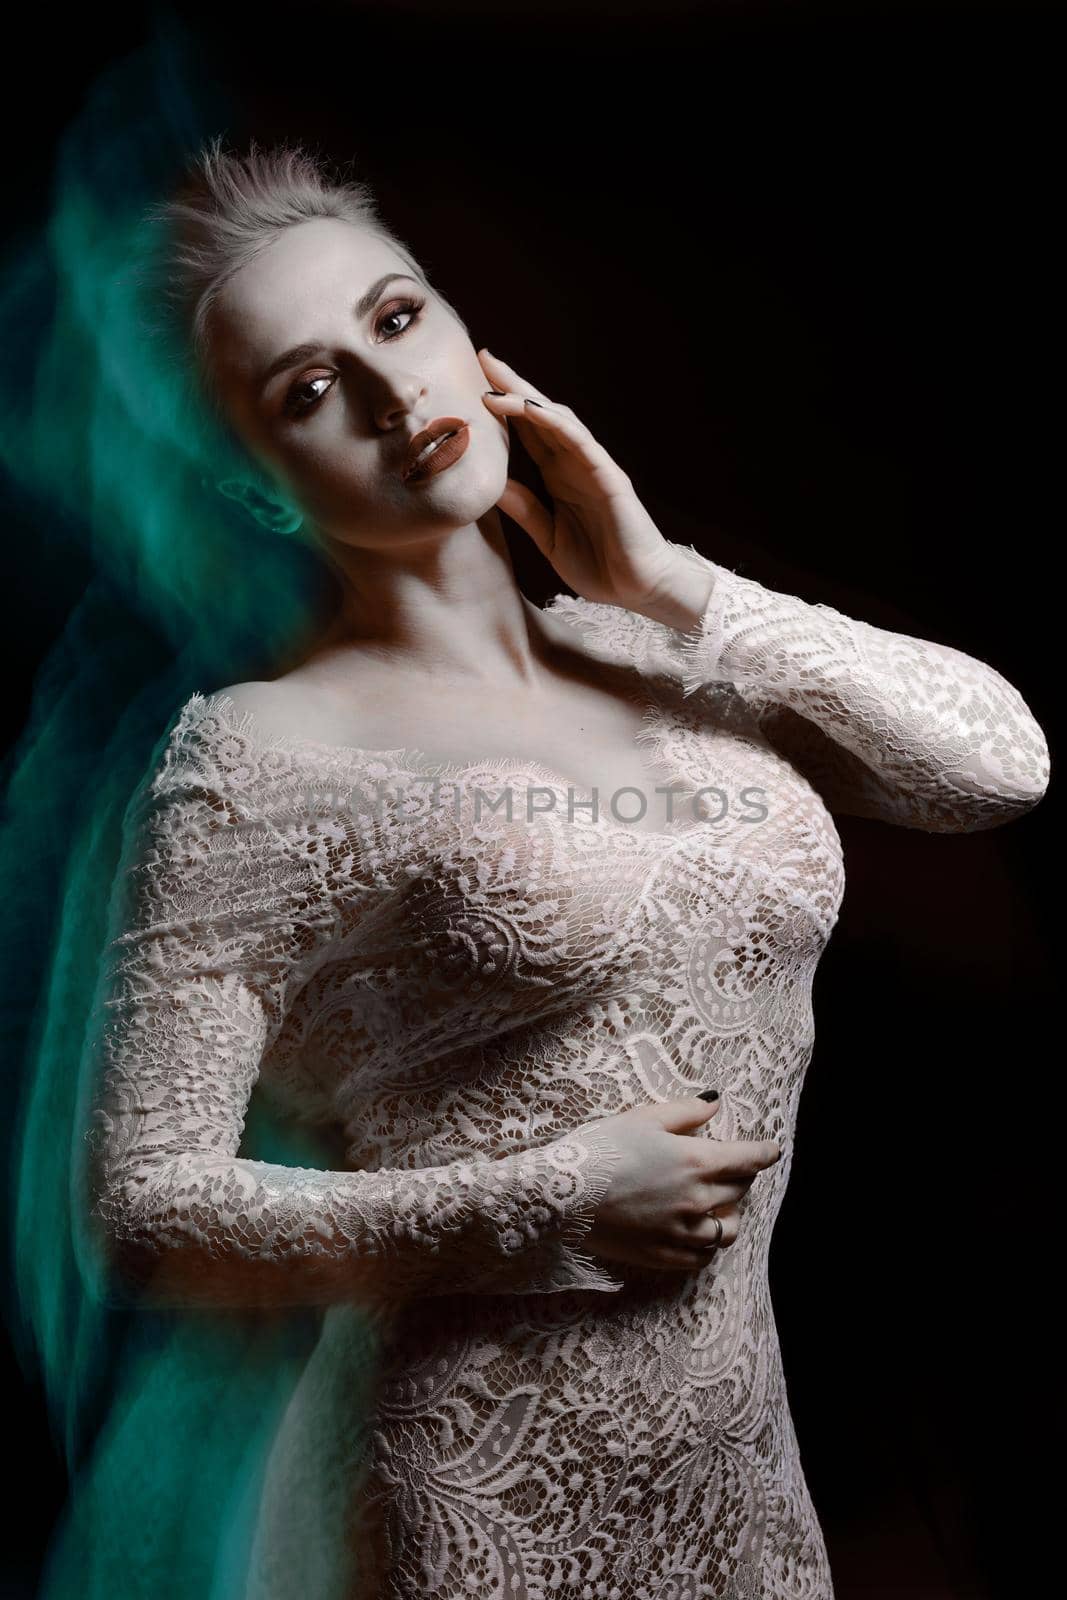 Beautiful girl in white lace negligee. A trace from a mixed light. The Snow Queen. Low key